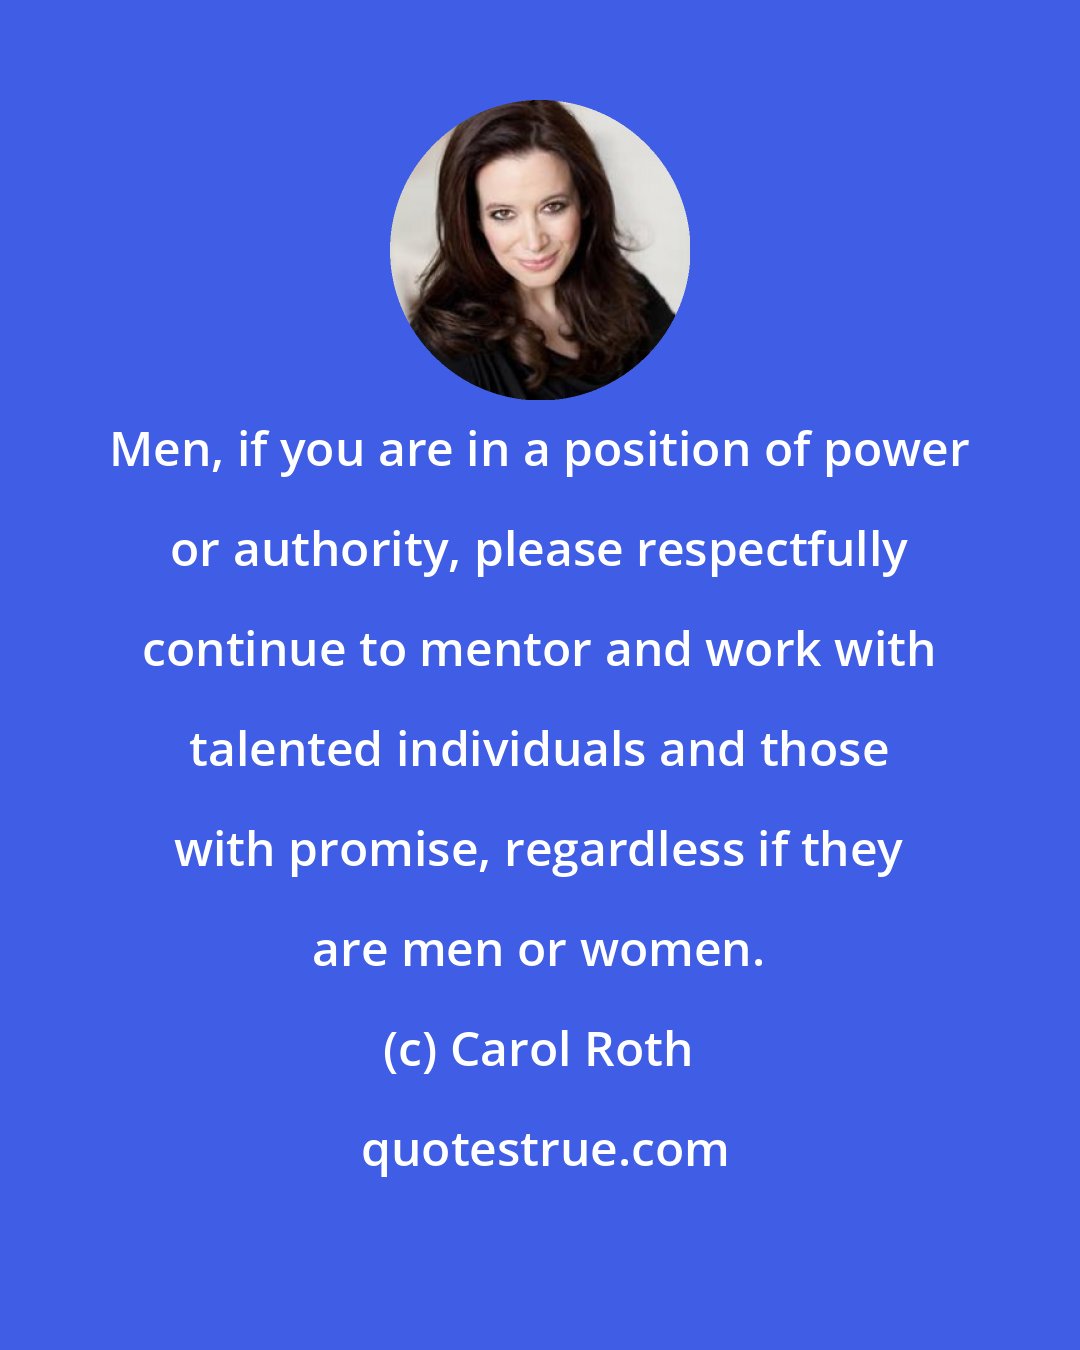 Carol Roth: Men, if you are in a position of power or authority, please respectfully continue to mentor and work with talented individuals and those with promise, regardless if they are men or women.